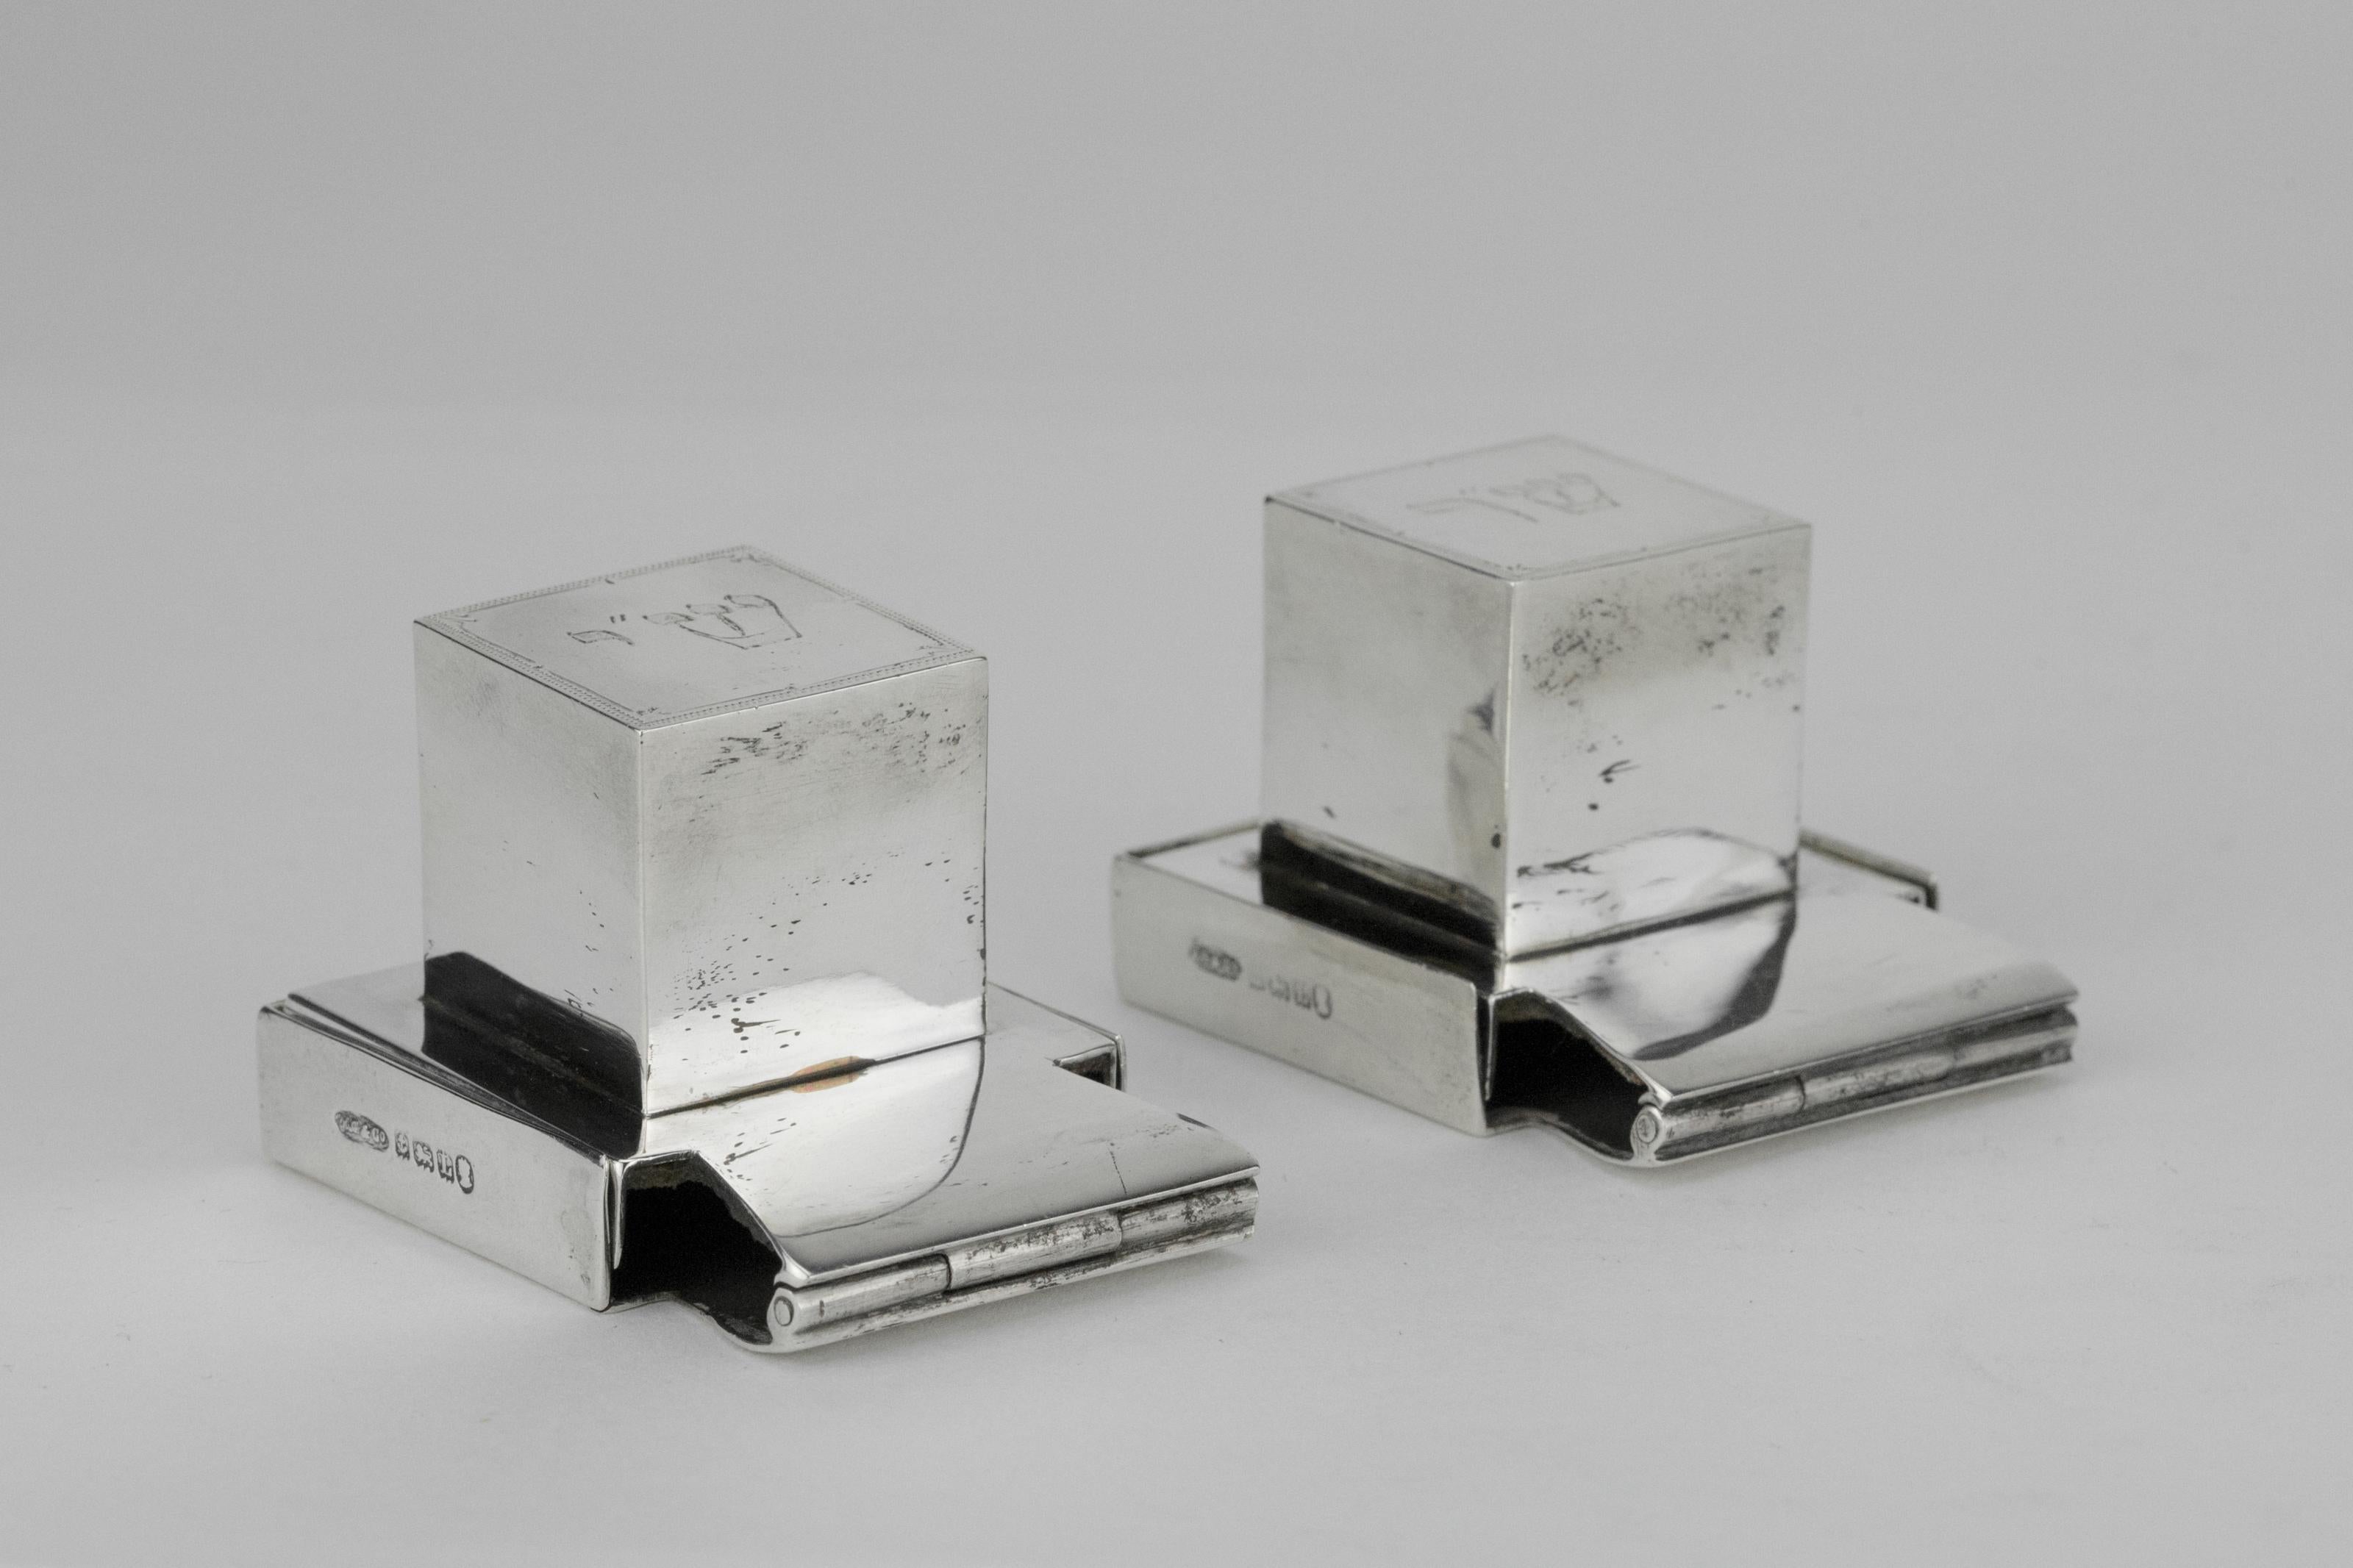 Handmade sterling silver Tefillin boxes, Birmingham, England, 1935.
Square boxes with hinged bases that open and close.
Hebrew inscription on the top of the boxes: Shin Yud = Shell Yad, Shin Resh = Shel Rosh.
Marked on the sides with English silver